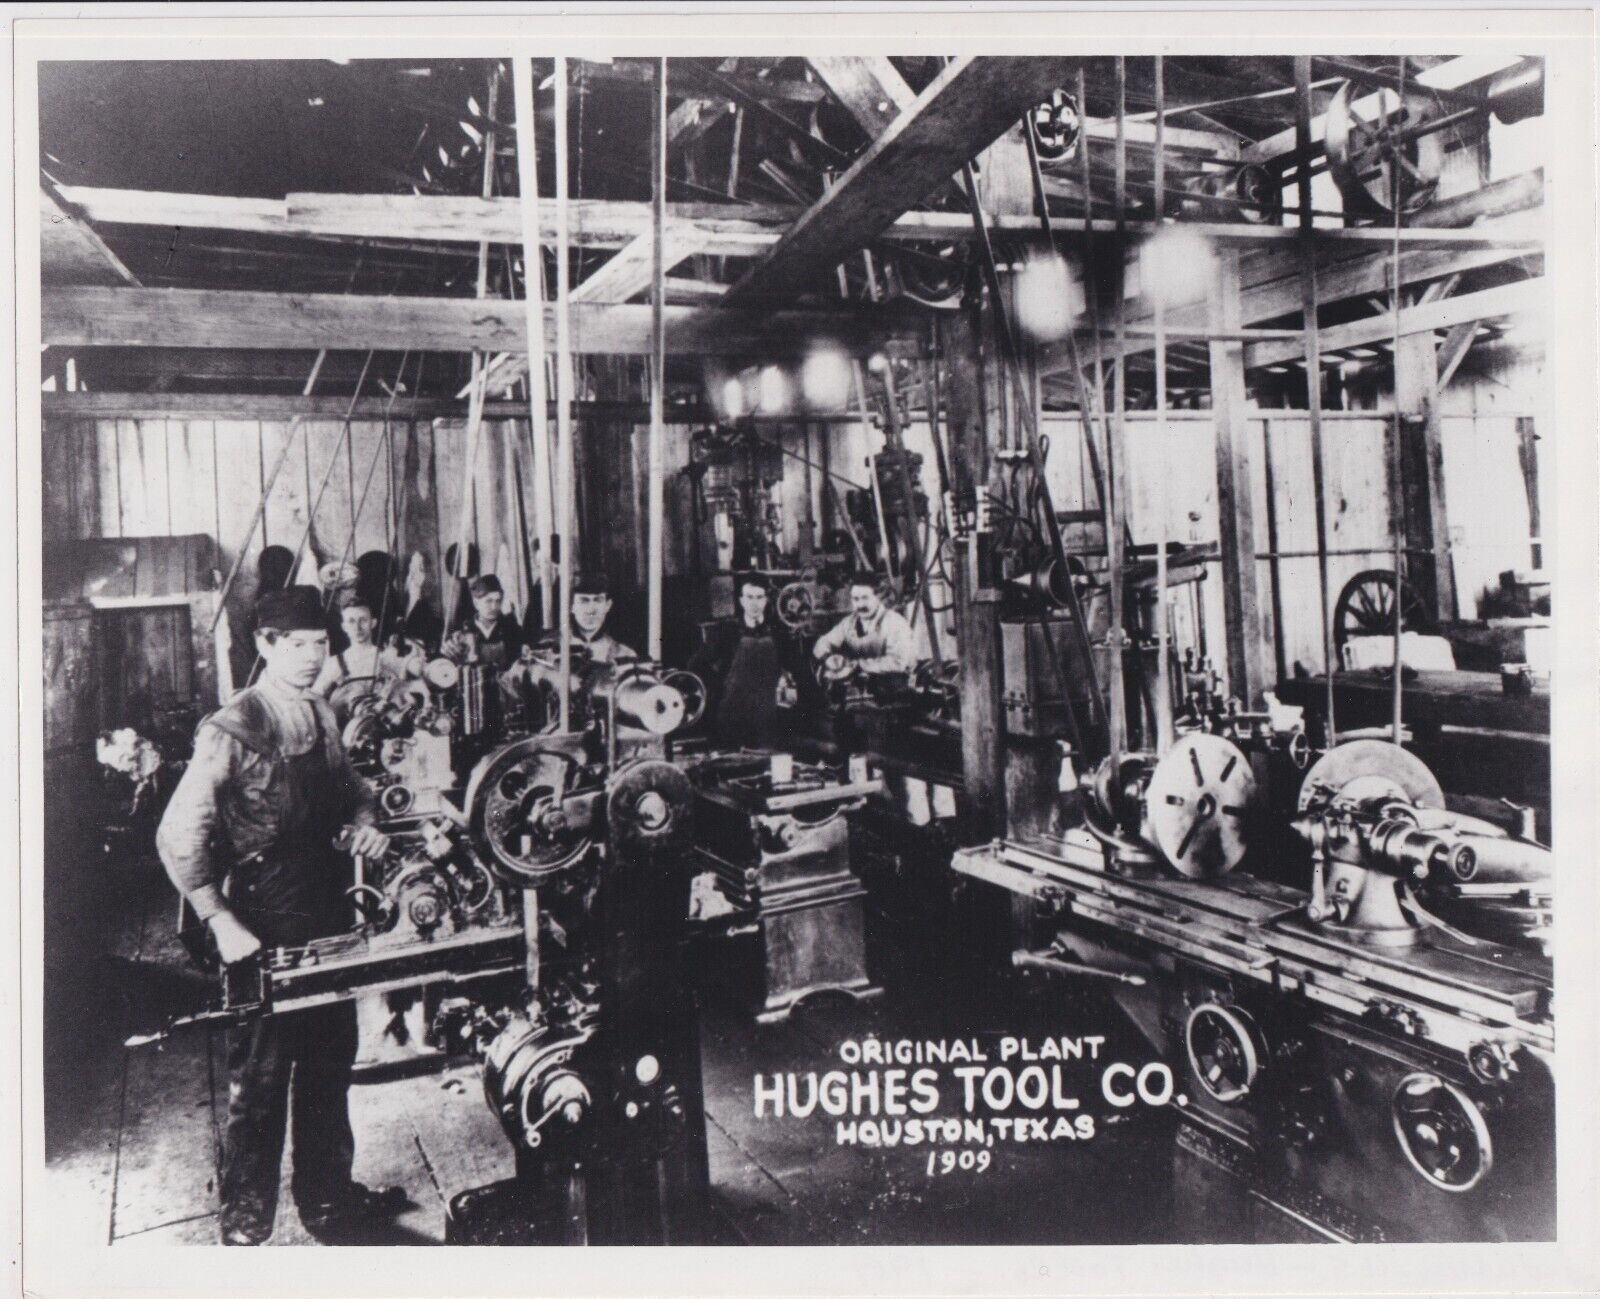 Workers & Machinery in HUGHES TOOL COMPANY Houston Texas * c. 1909 LABOR Photo